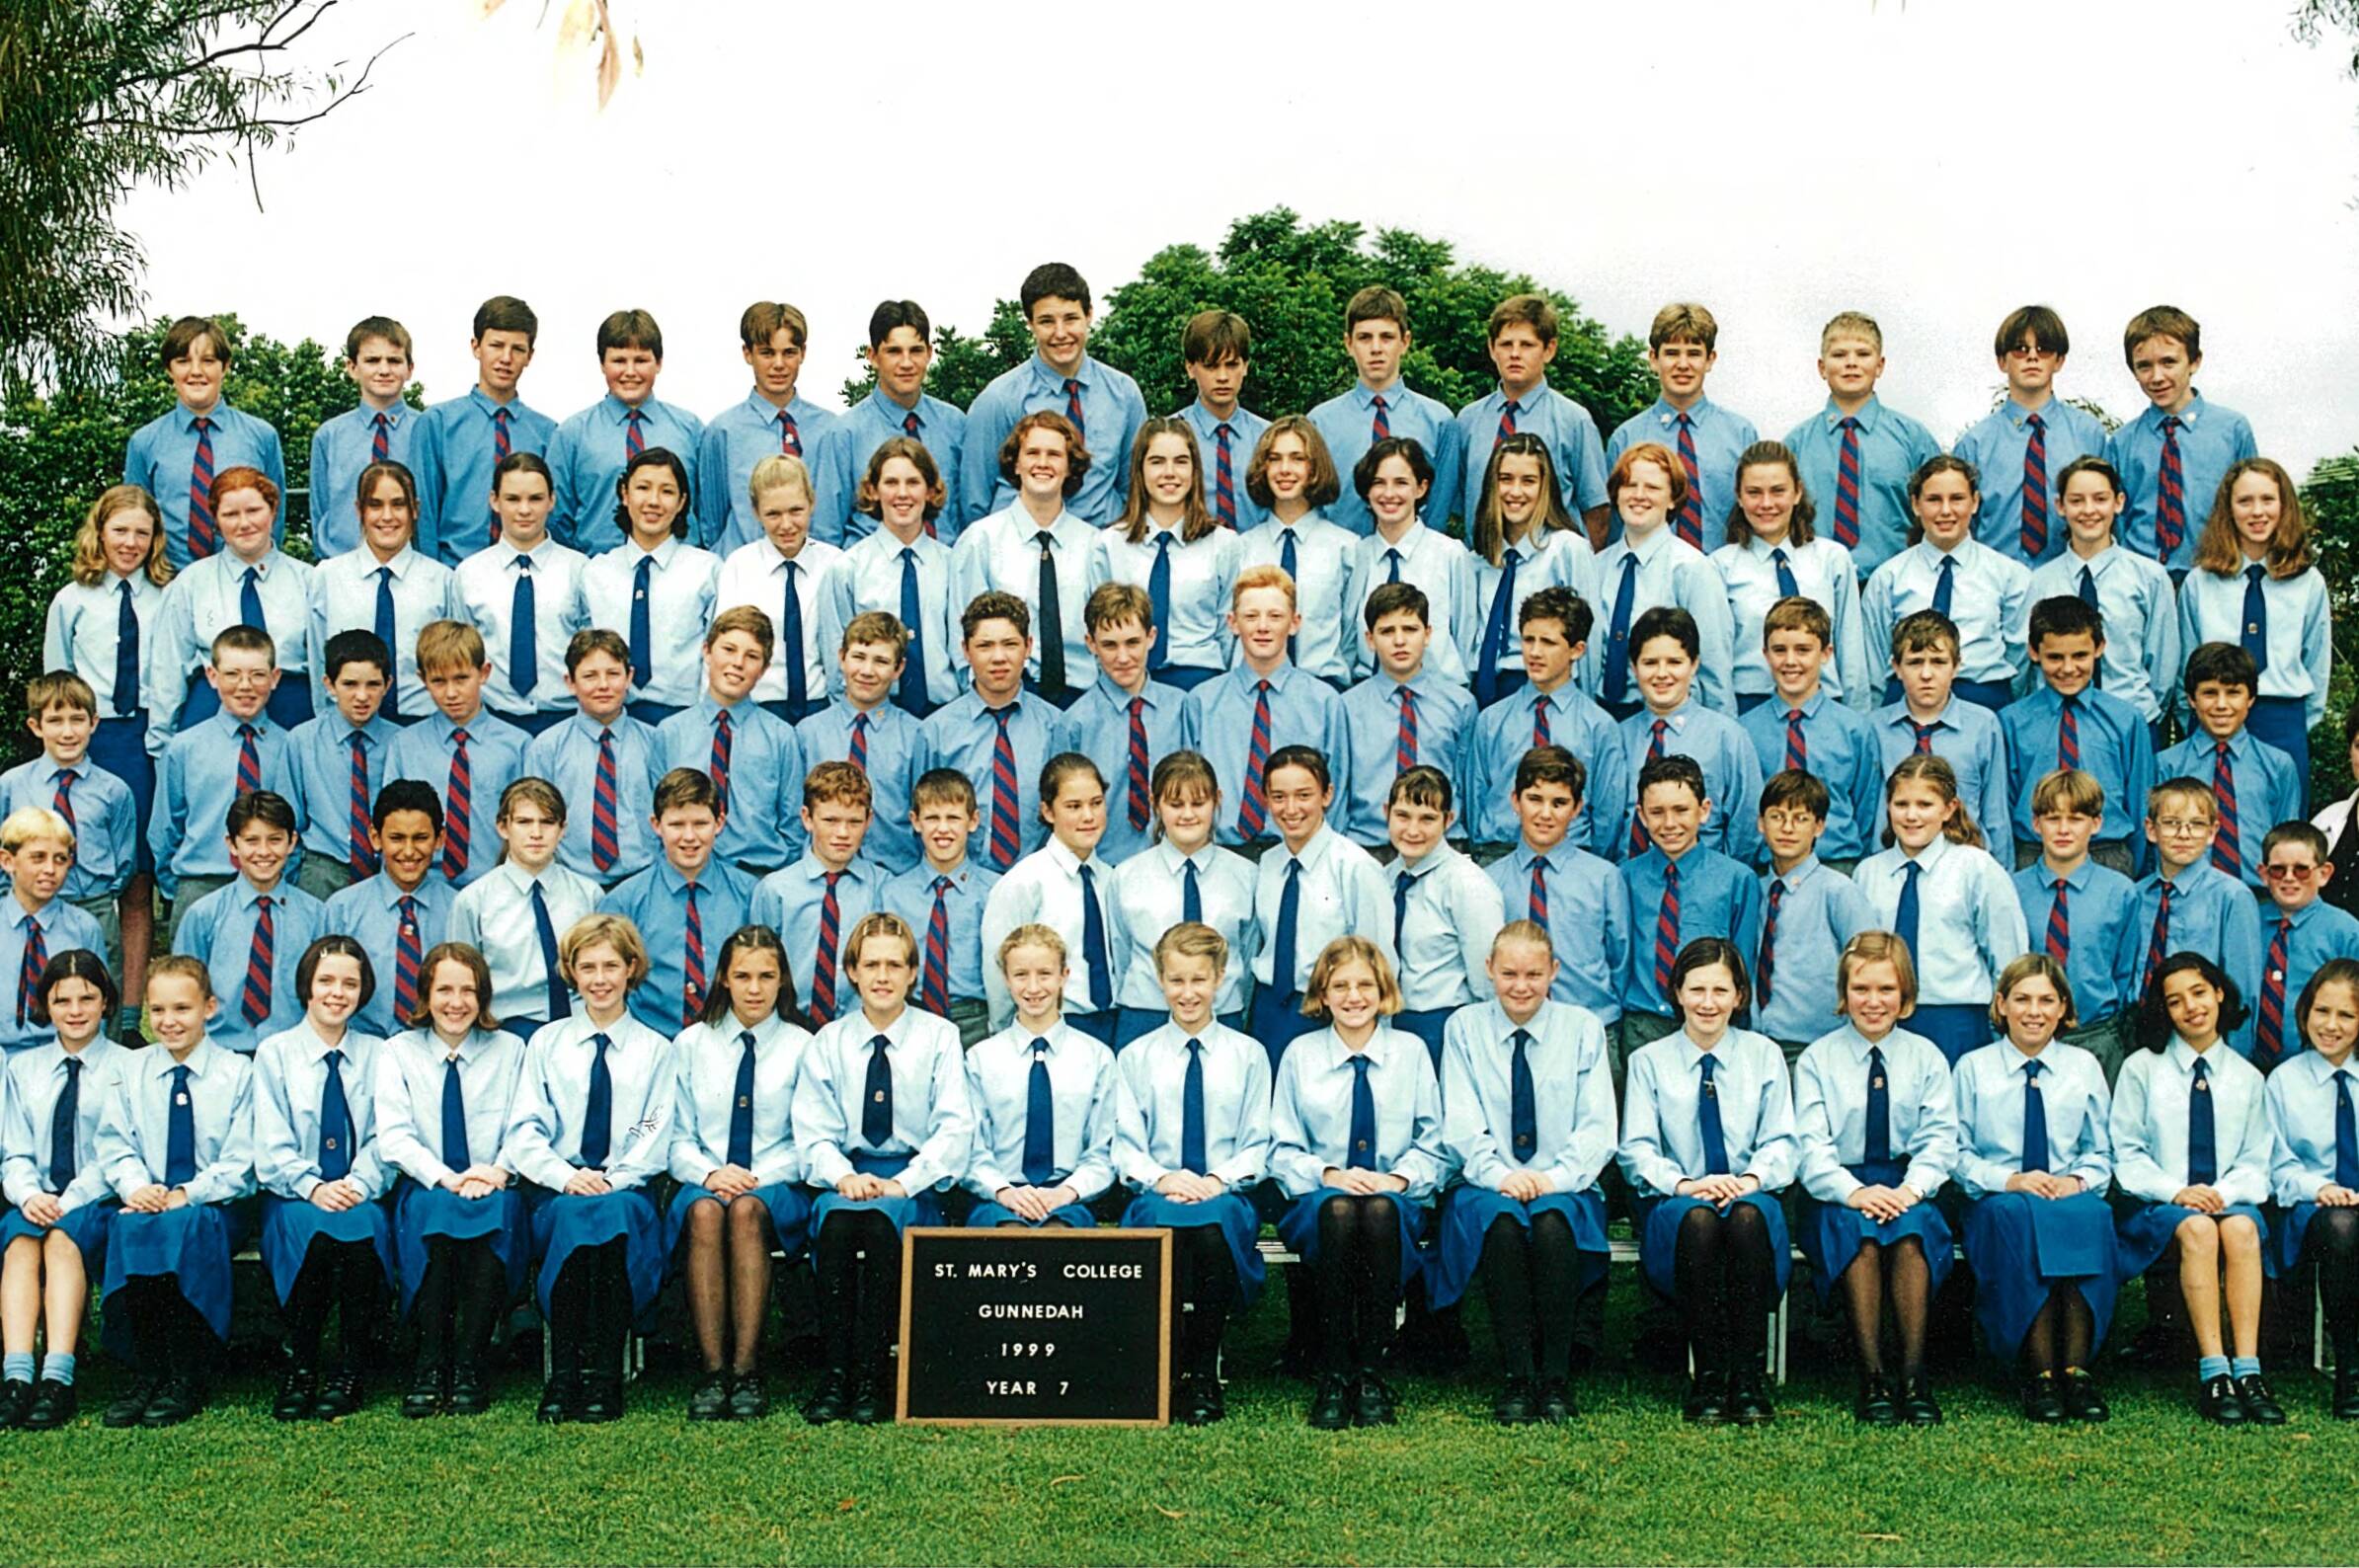 St. Mary's High School class of 1999